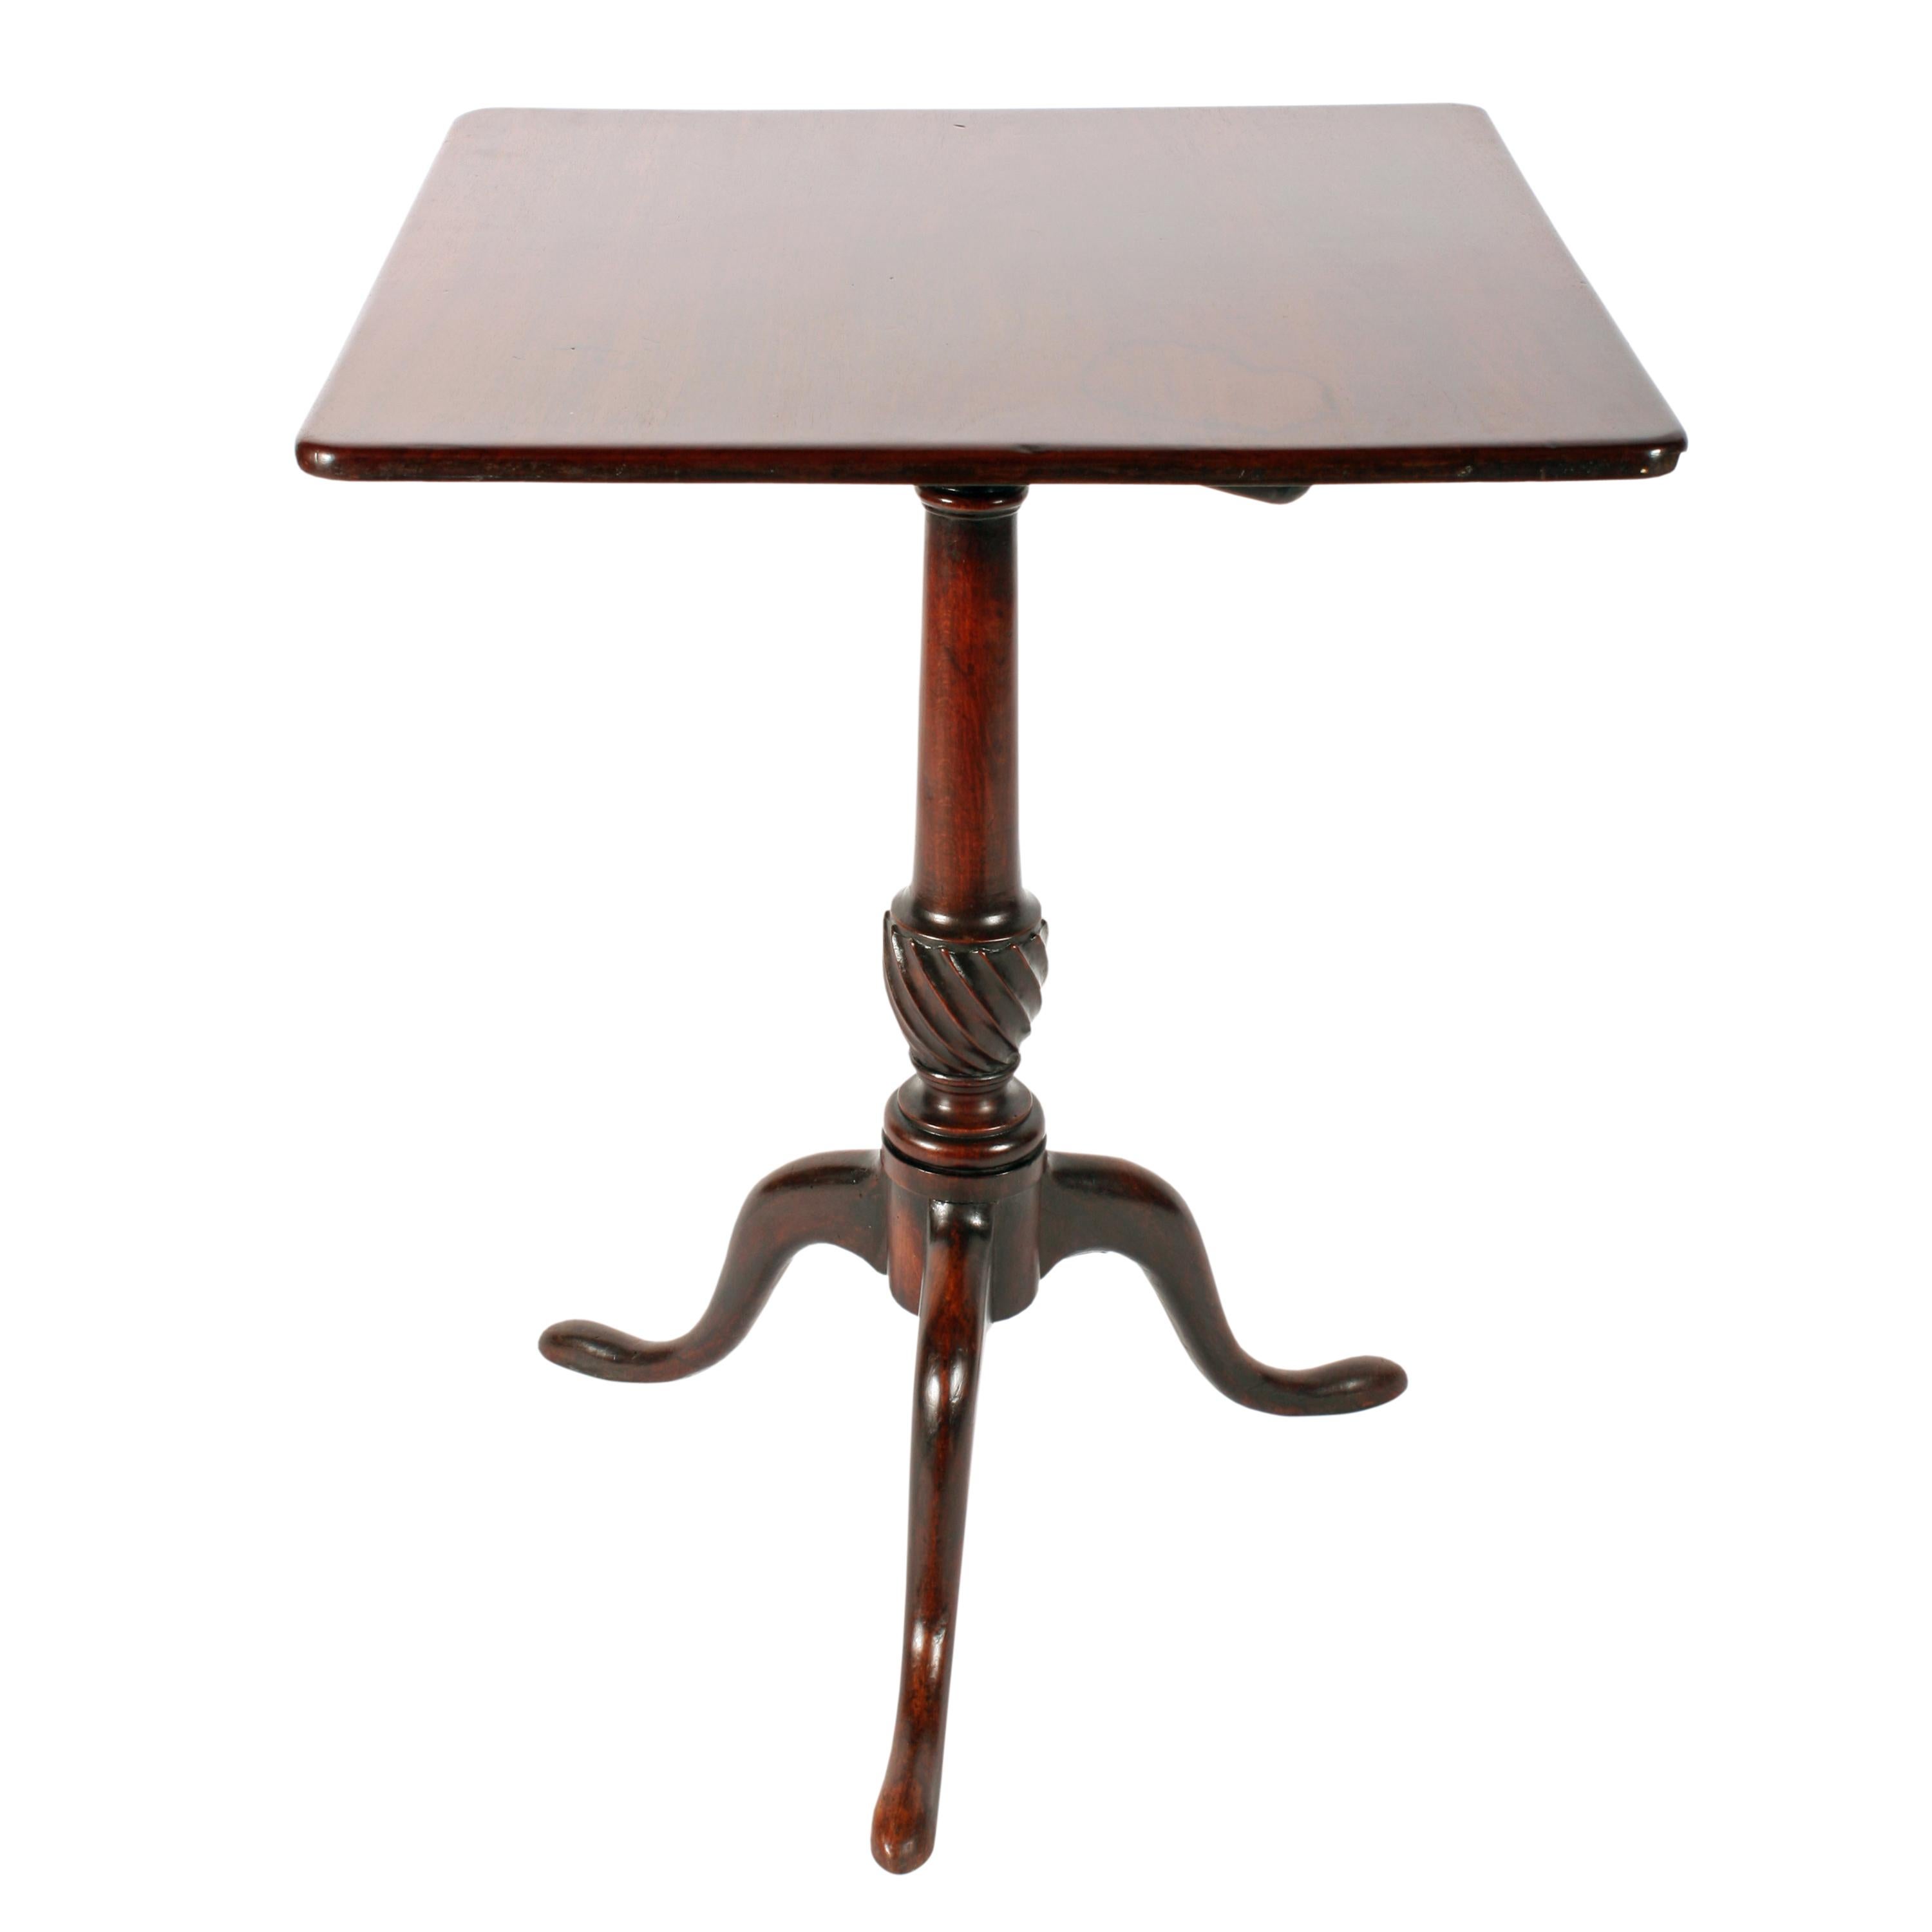 A late 18th century Georgian mahogany square tip top tripod table.

The top has a twist locking catch underneath which unlocks and allows the top to tip.

The base has three cabriole legs and a turned tapering stalk that has a decorative spiral